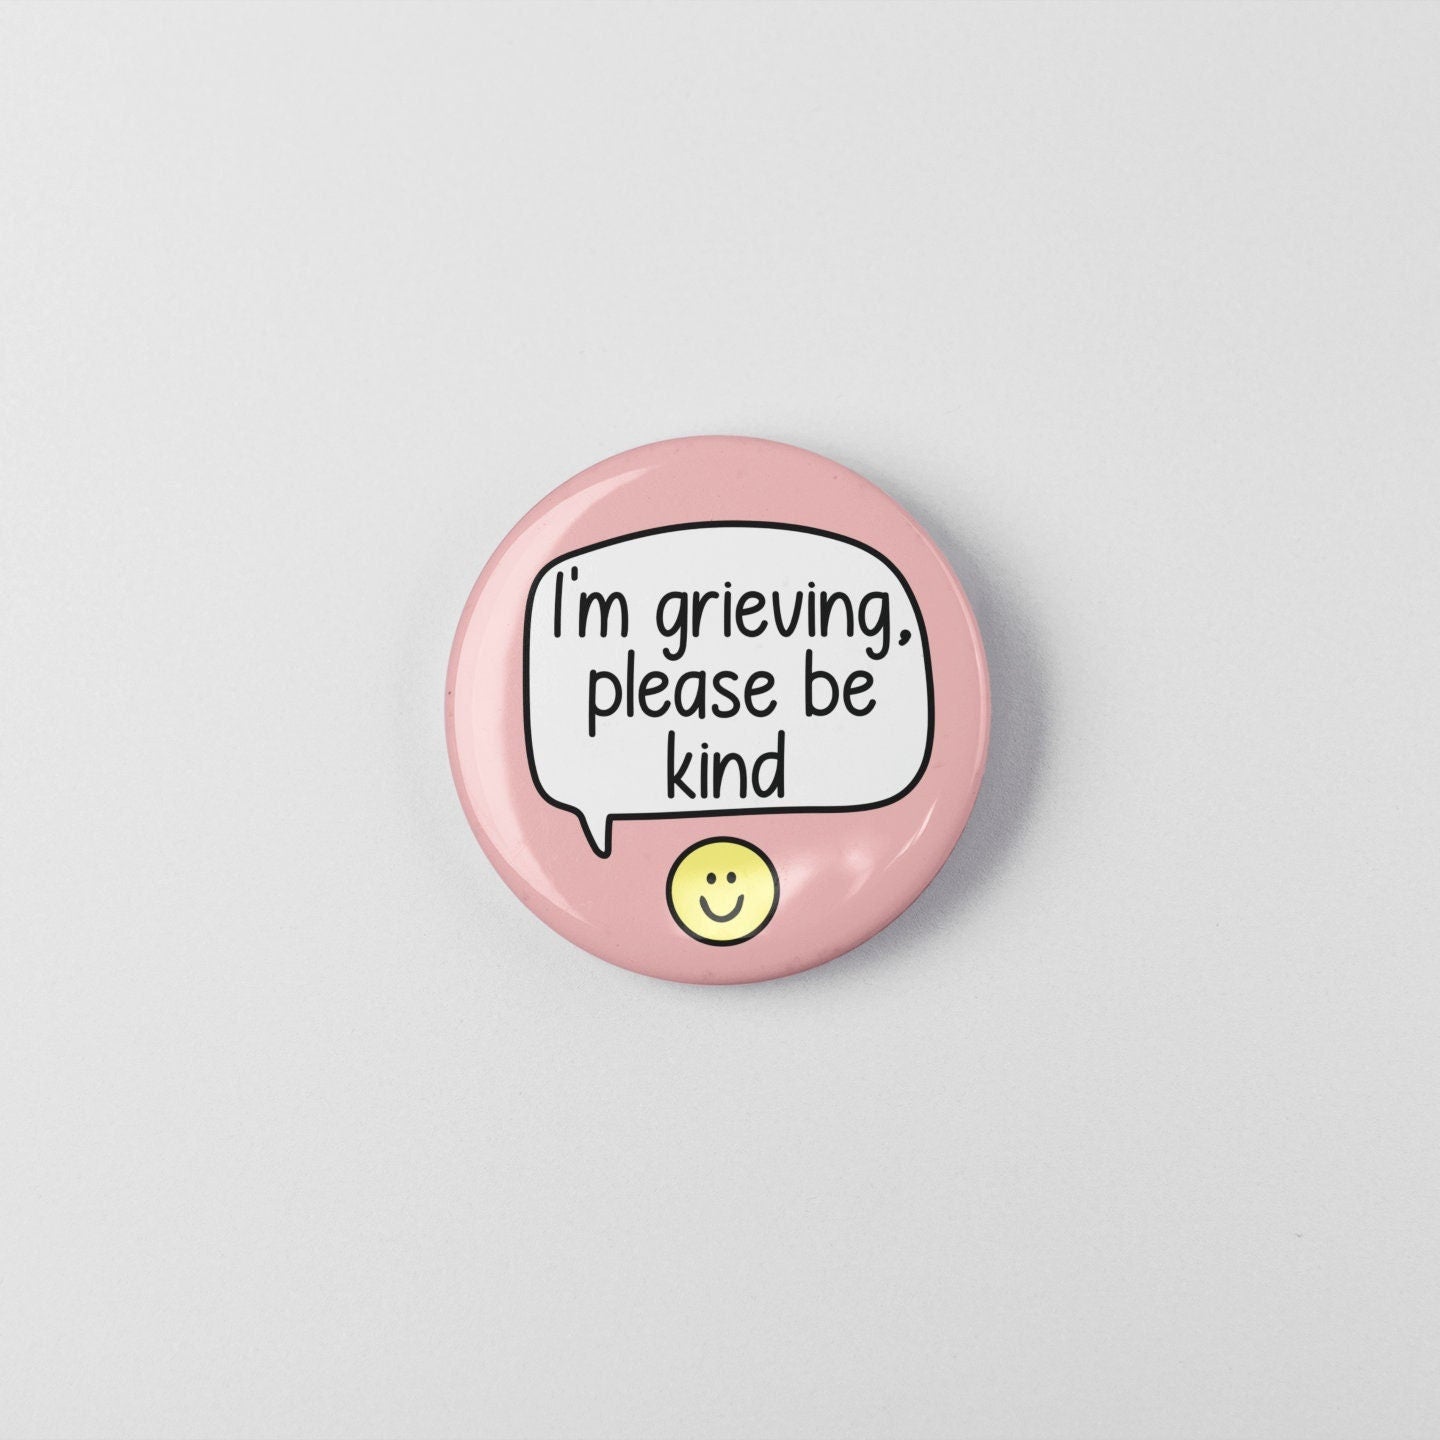 I'm Grieving Please Be Kind - Badge Pin | Bereavement, Remembrance